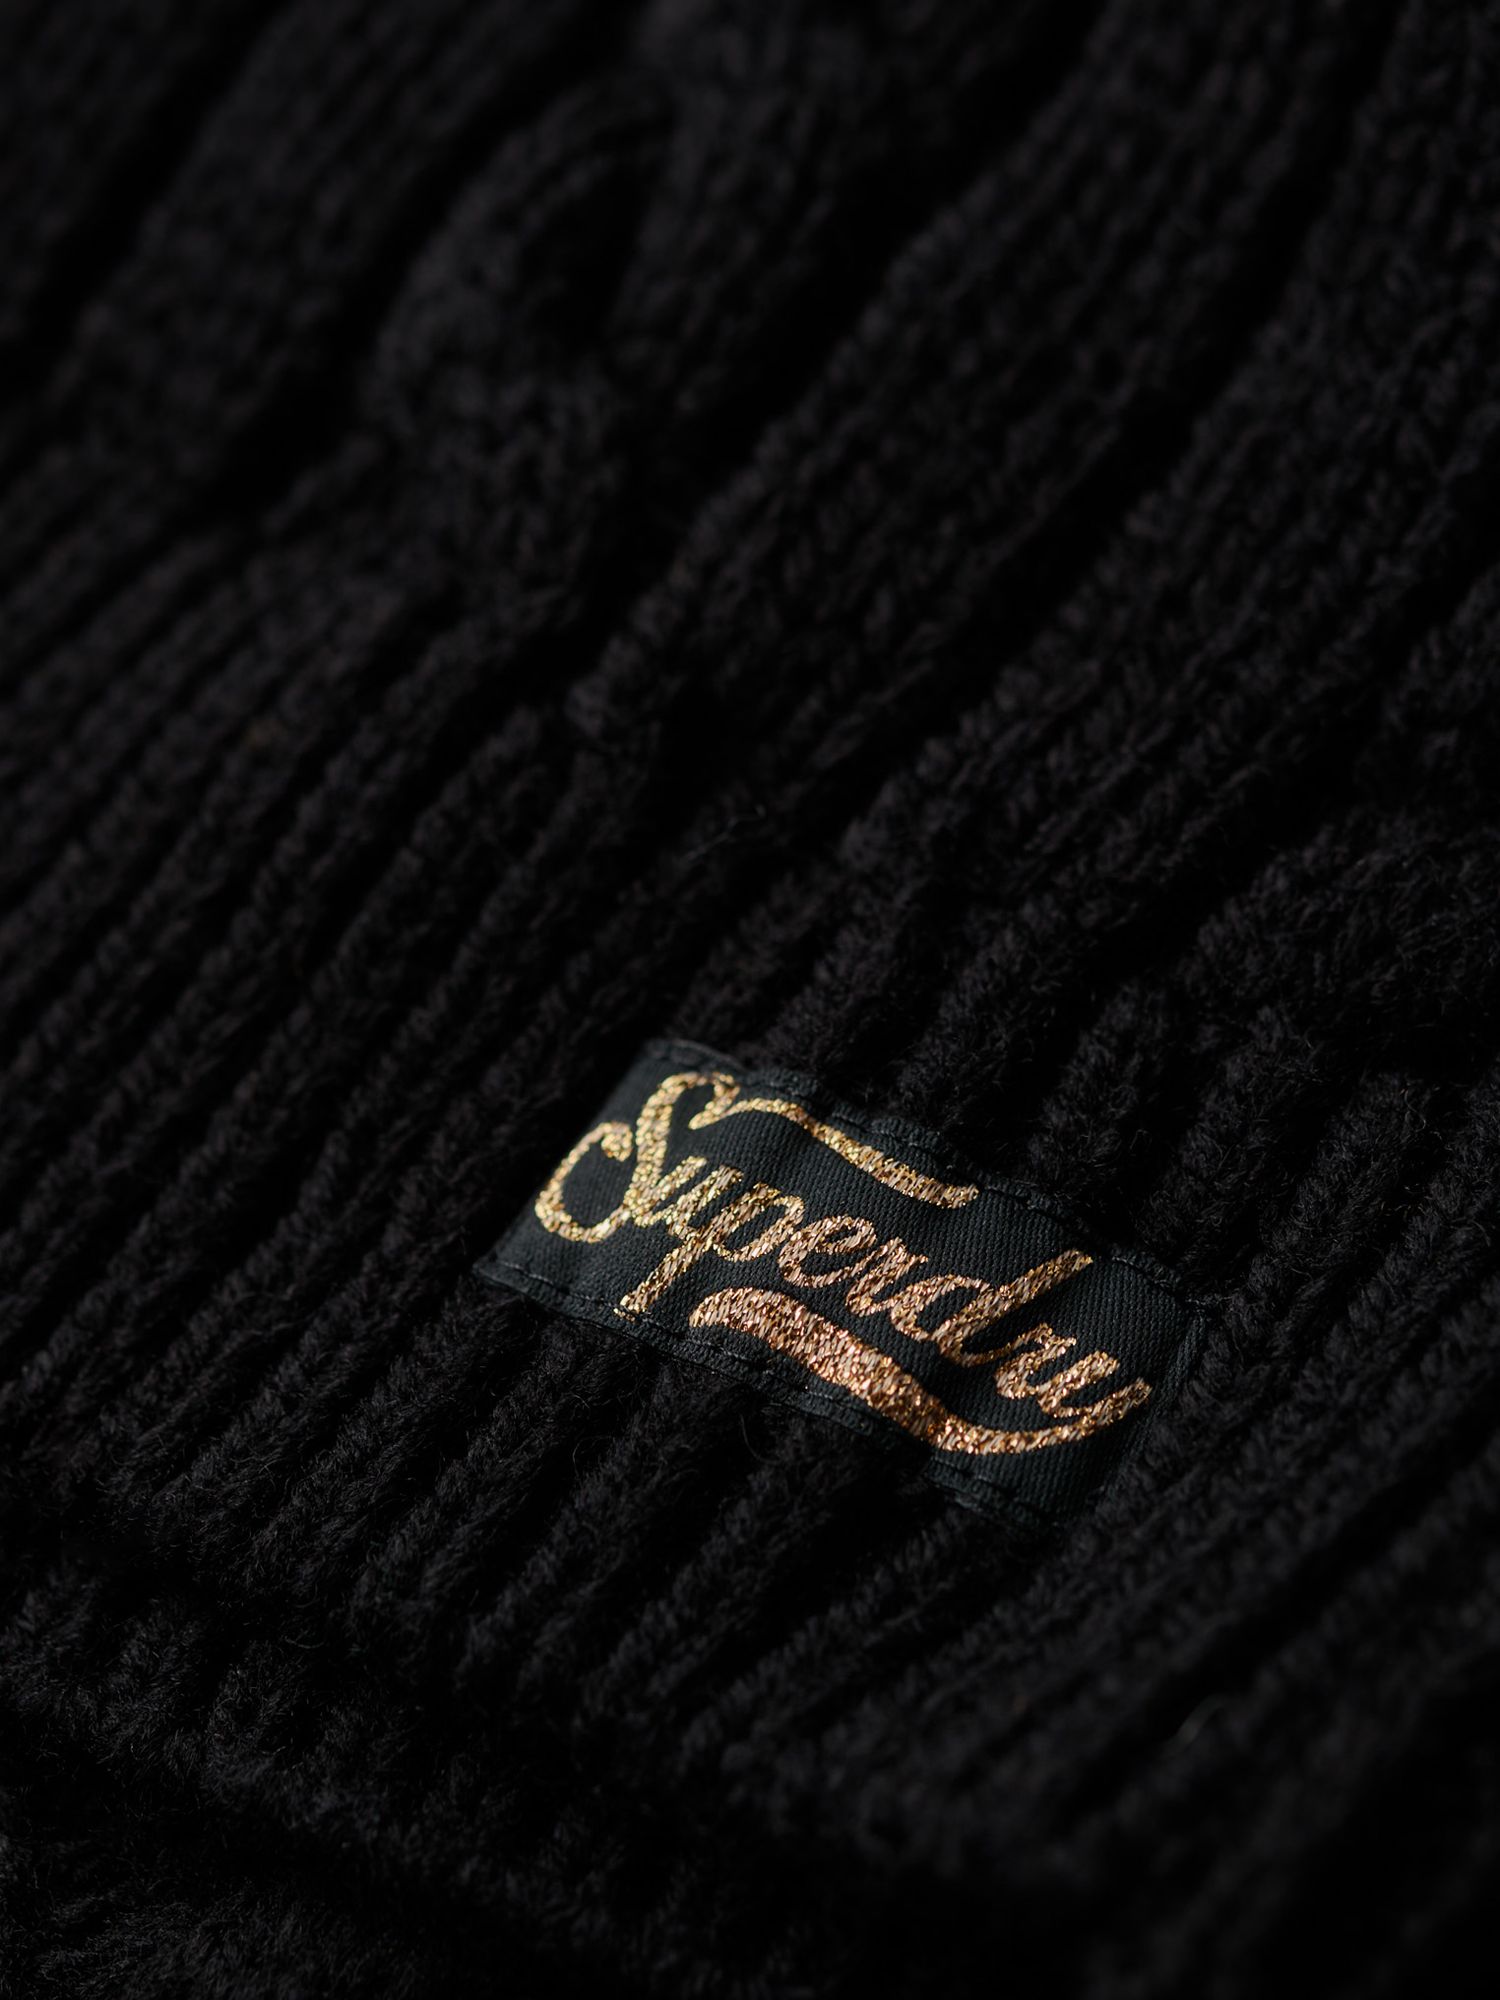 Superdry Ywist Cable Wool Blend Knit Jumper, Black at John Lewis & Partners